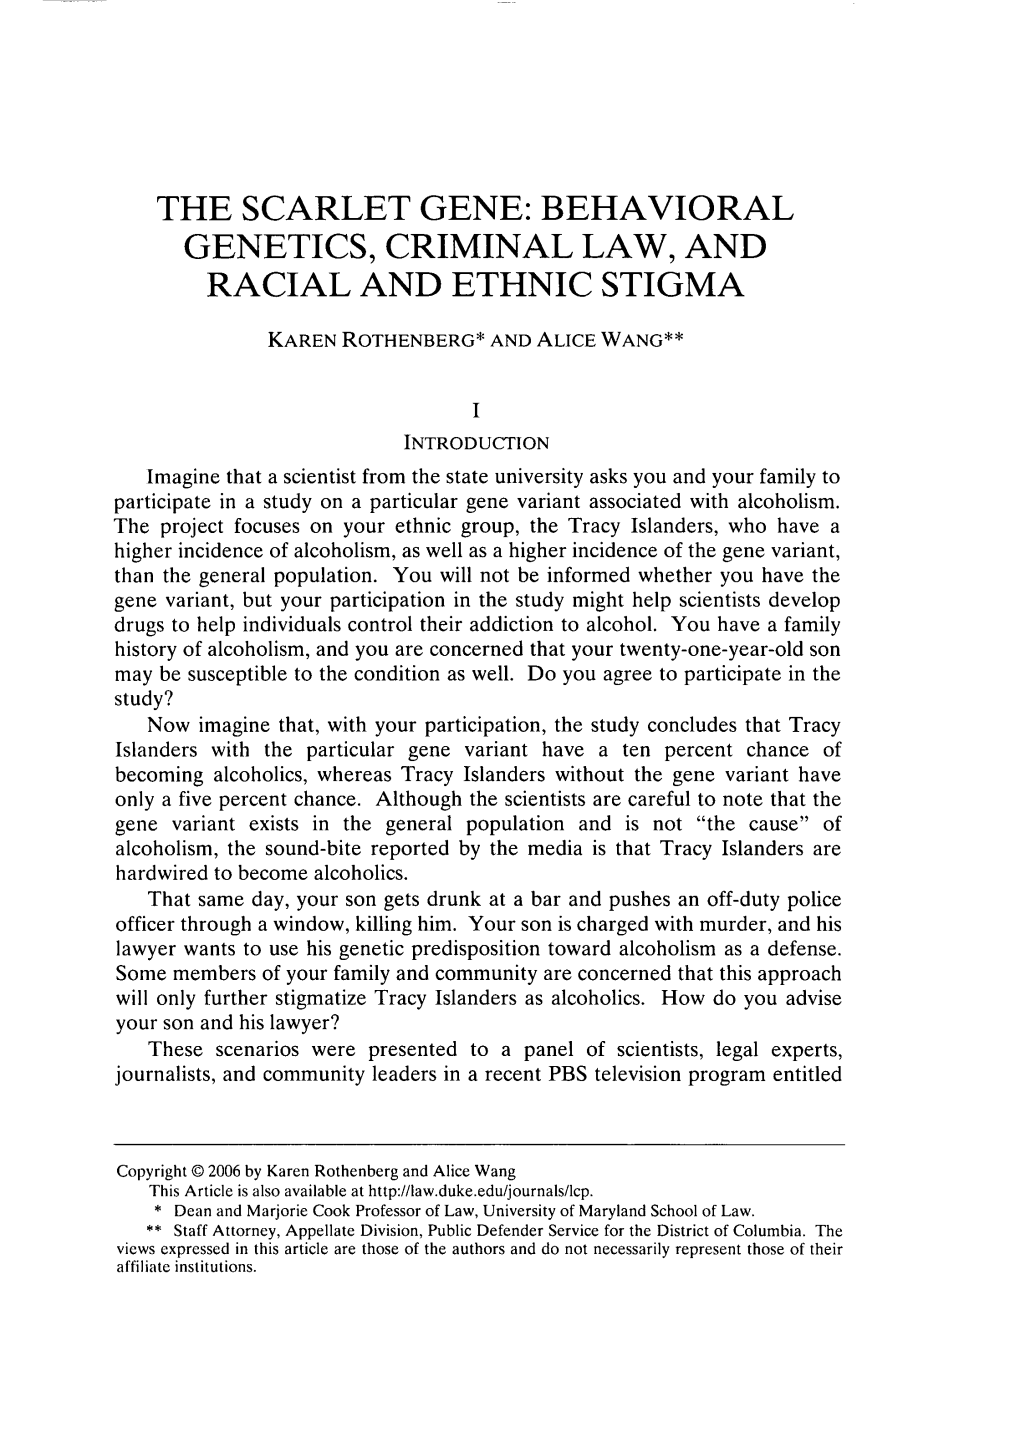 The Scarlet Gene: Behavioral Genetics, Criminal Law, and Racial and Ethnic Stigma